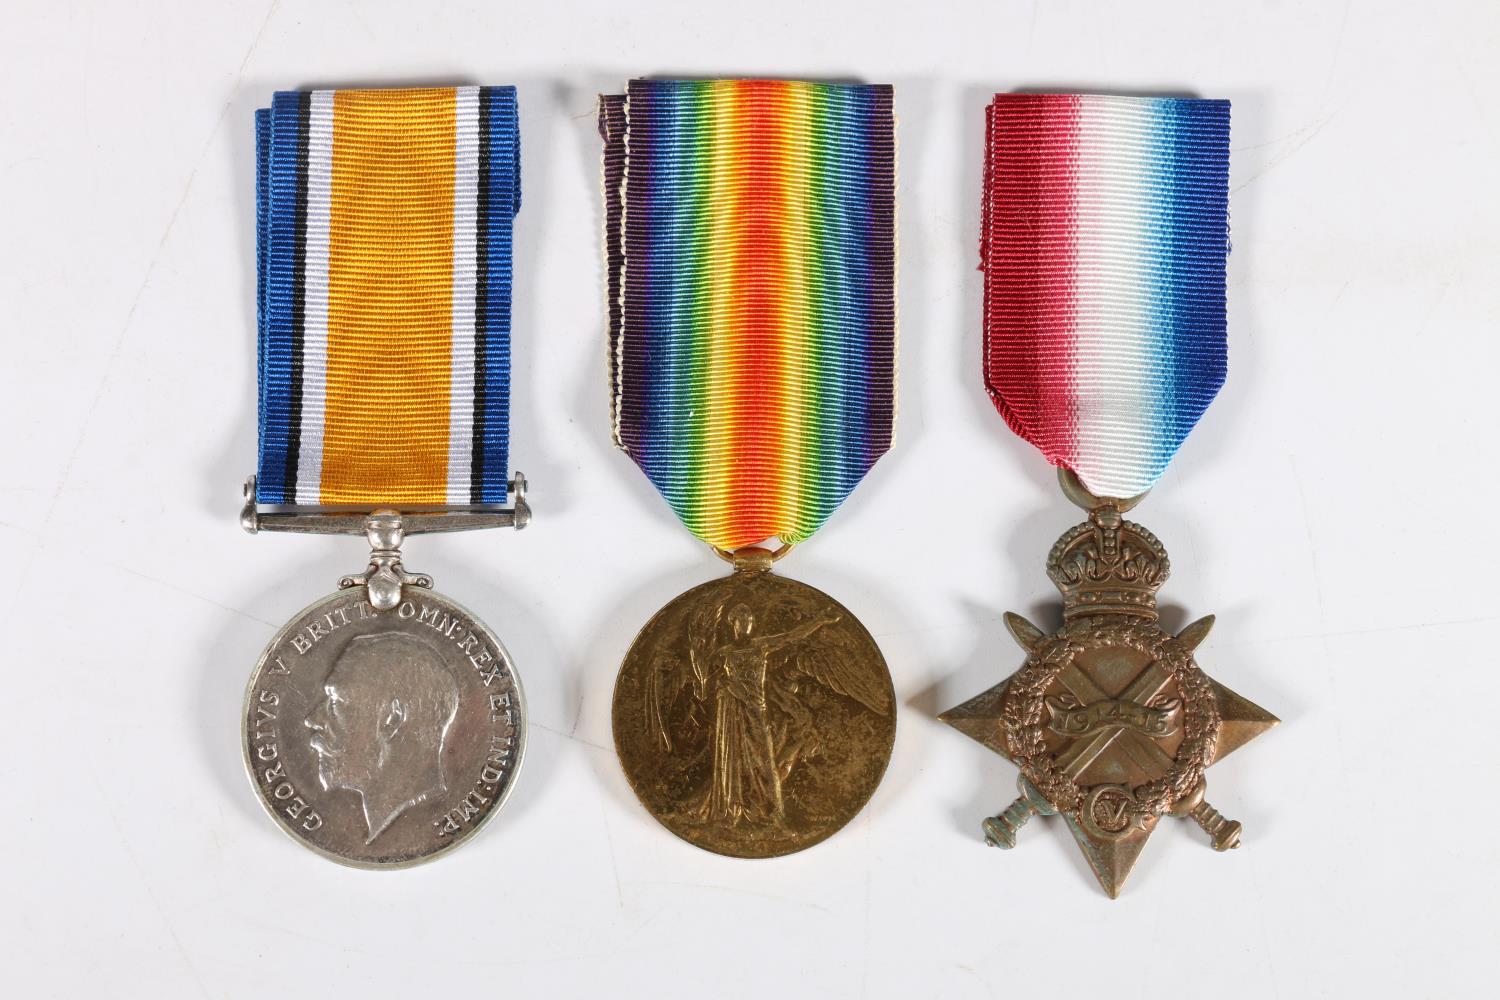 Medals of S/9512 Private Joseph Duncan of the 2nd Battalion Gordon Highlanders comprising WWI